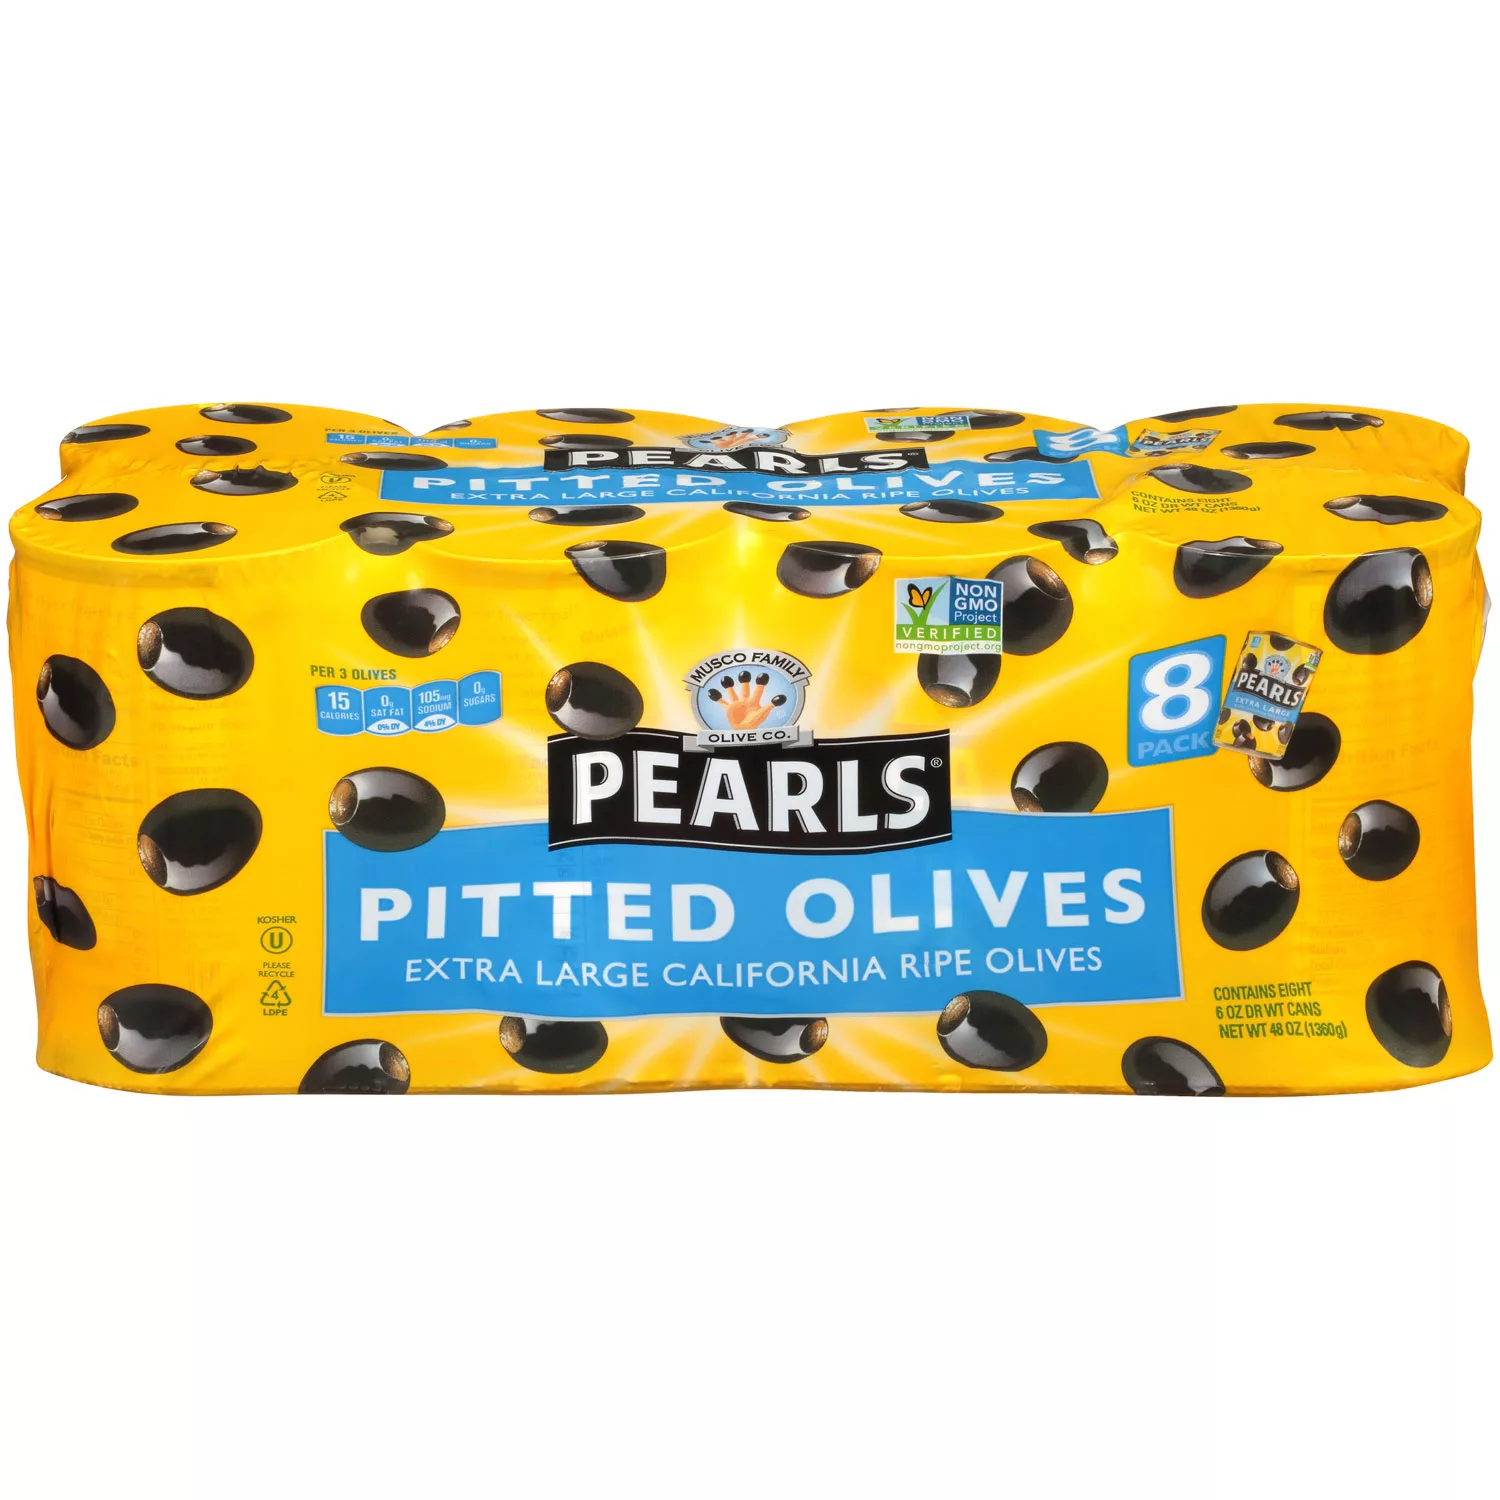 Pearls Extra Large Pitted California Olives